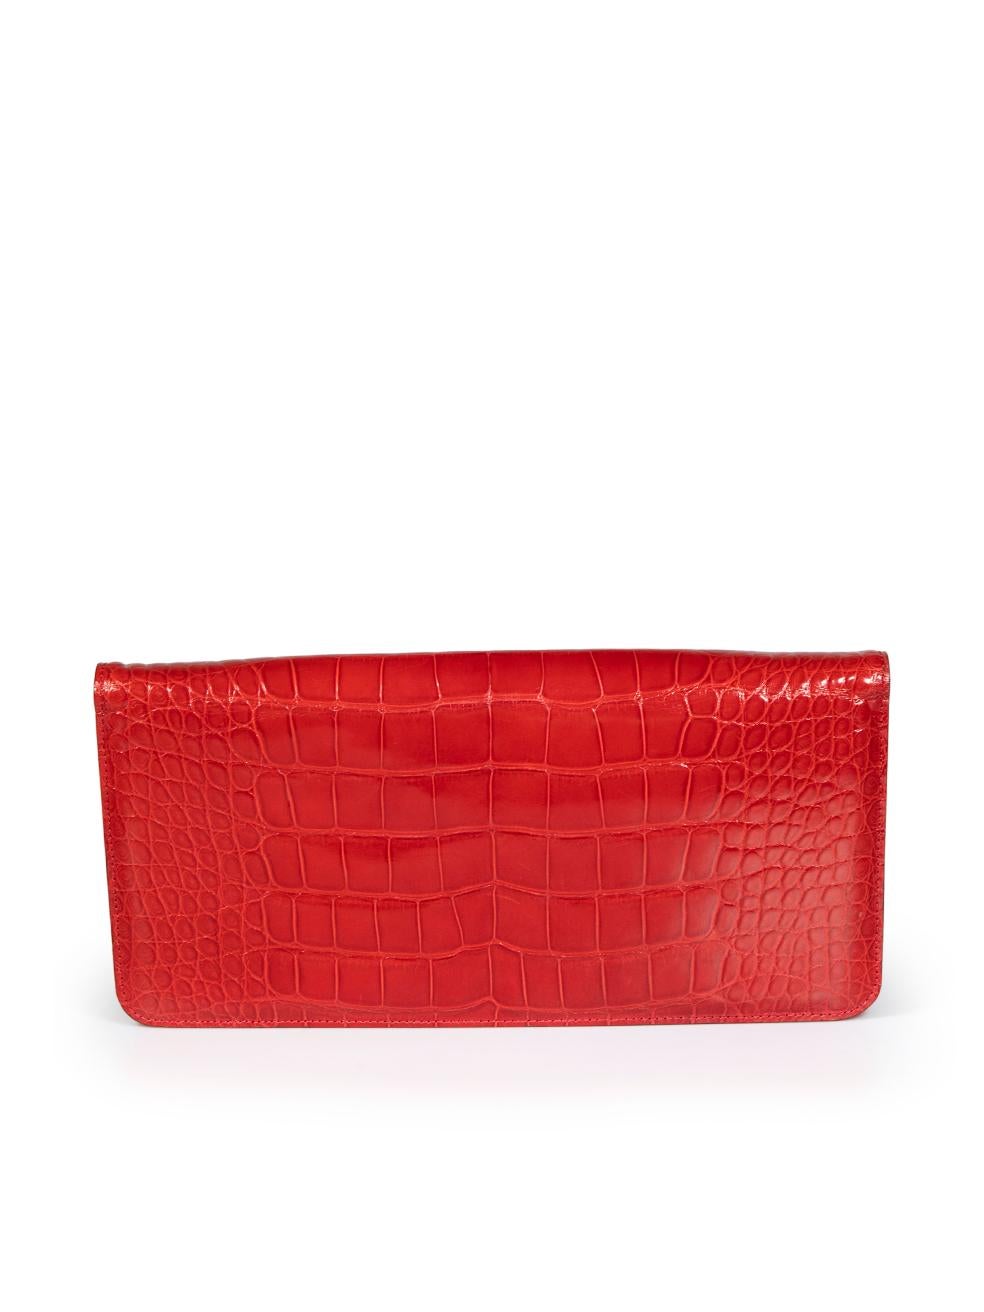 Tom Ford Red Alligator Natalia Convertible Clutch In Excellent Condition For Sale In London, GB